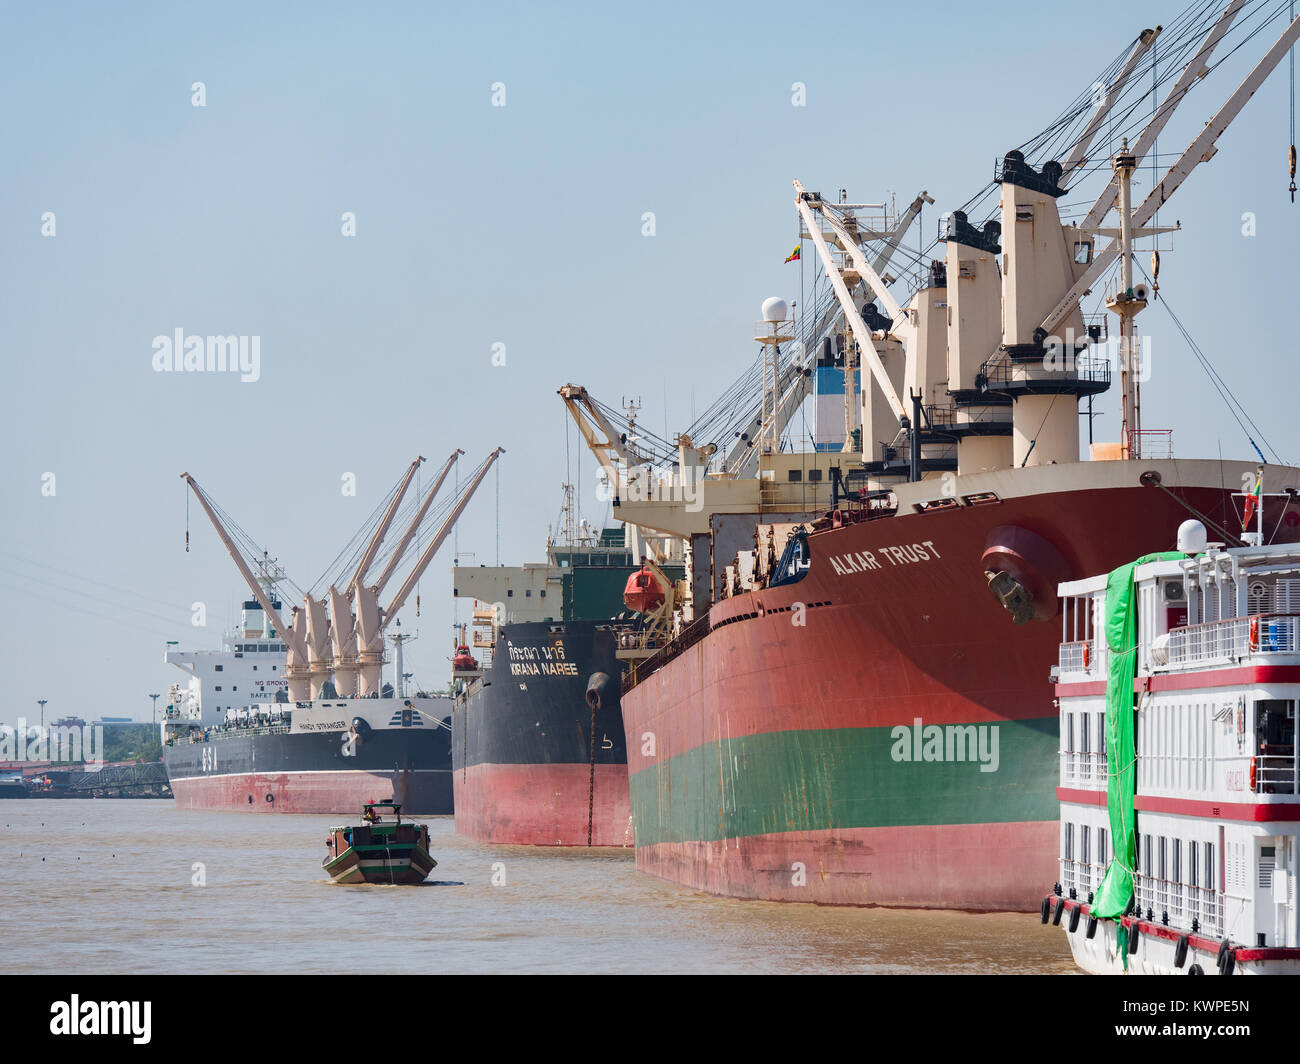 Traditional, wooden cargo vessel on Yangon River next to one of Yangonâ€™s main commercial ports. Stock Photo